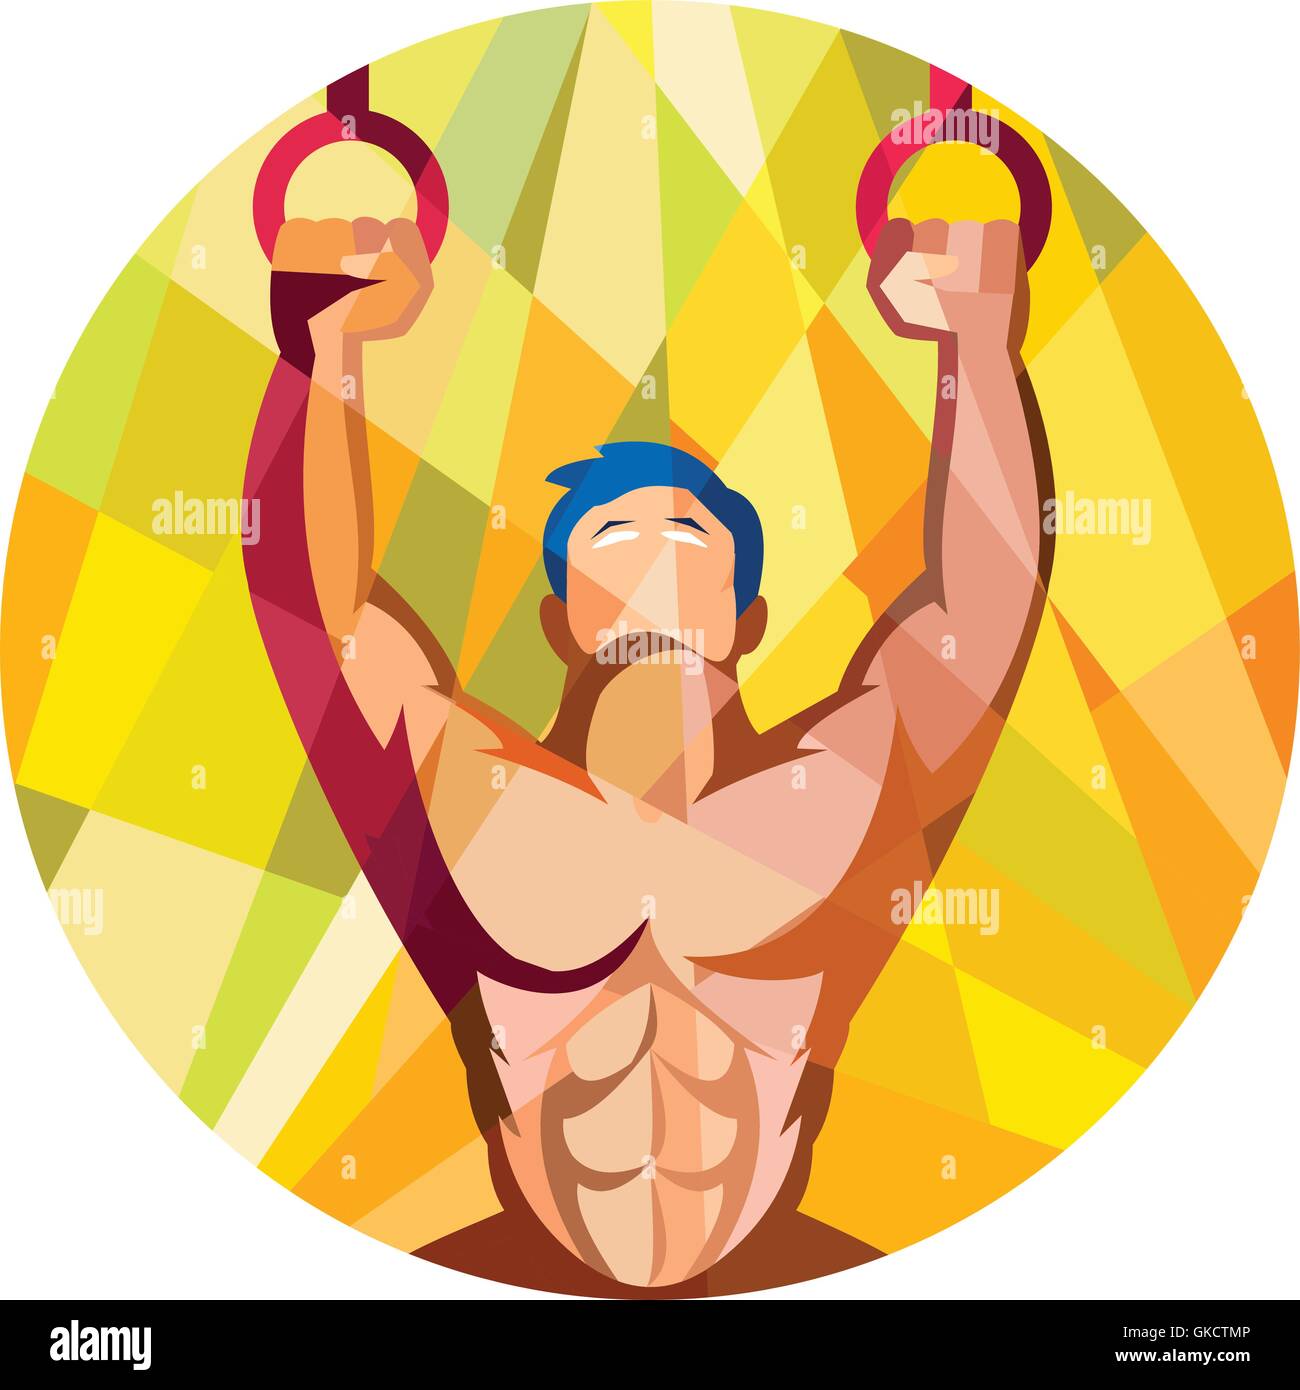 Cross-fit Training Weights Ring Circle Low Polygon Stock Vector